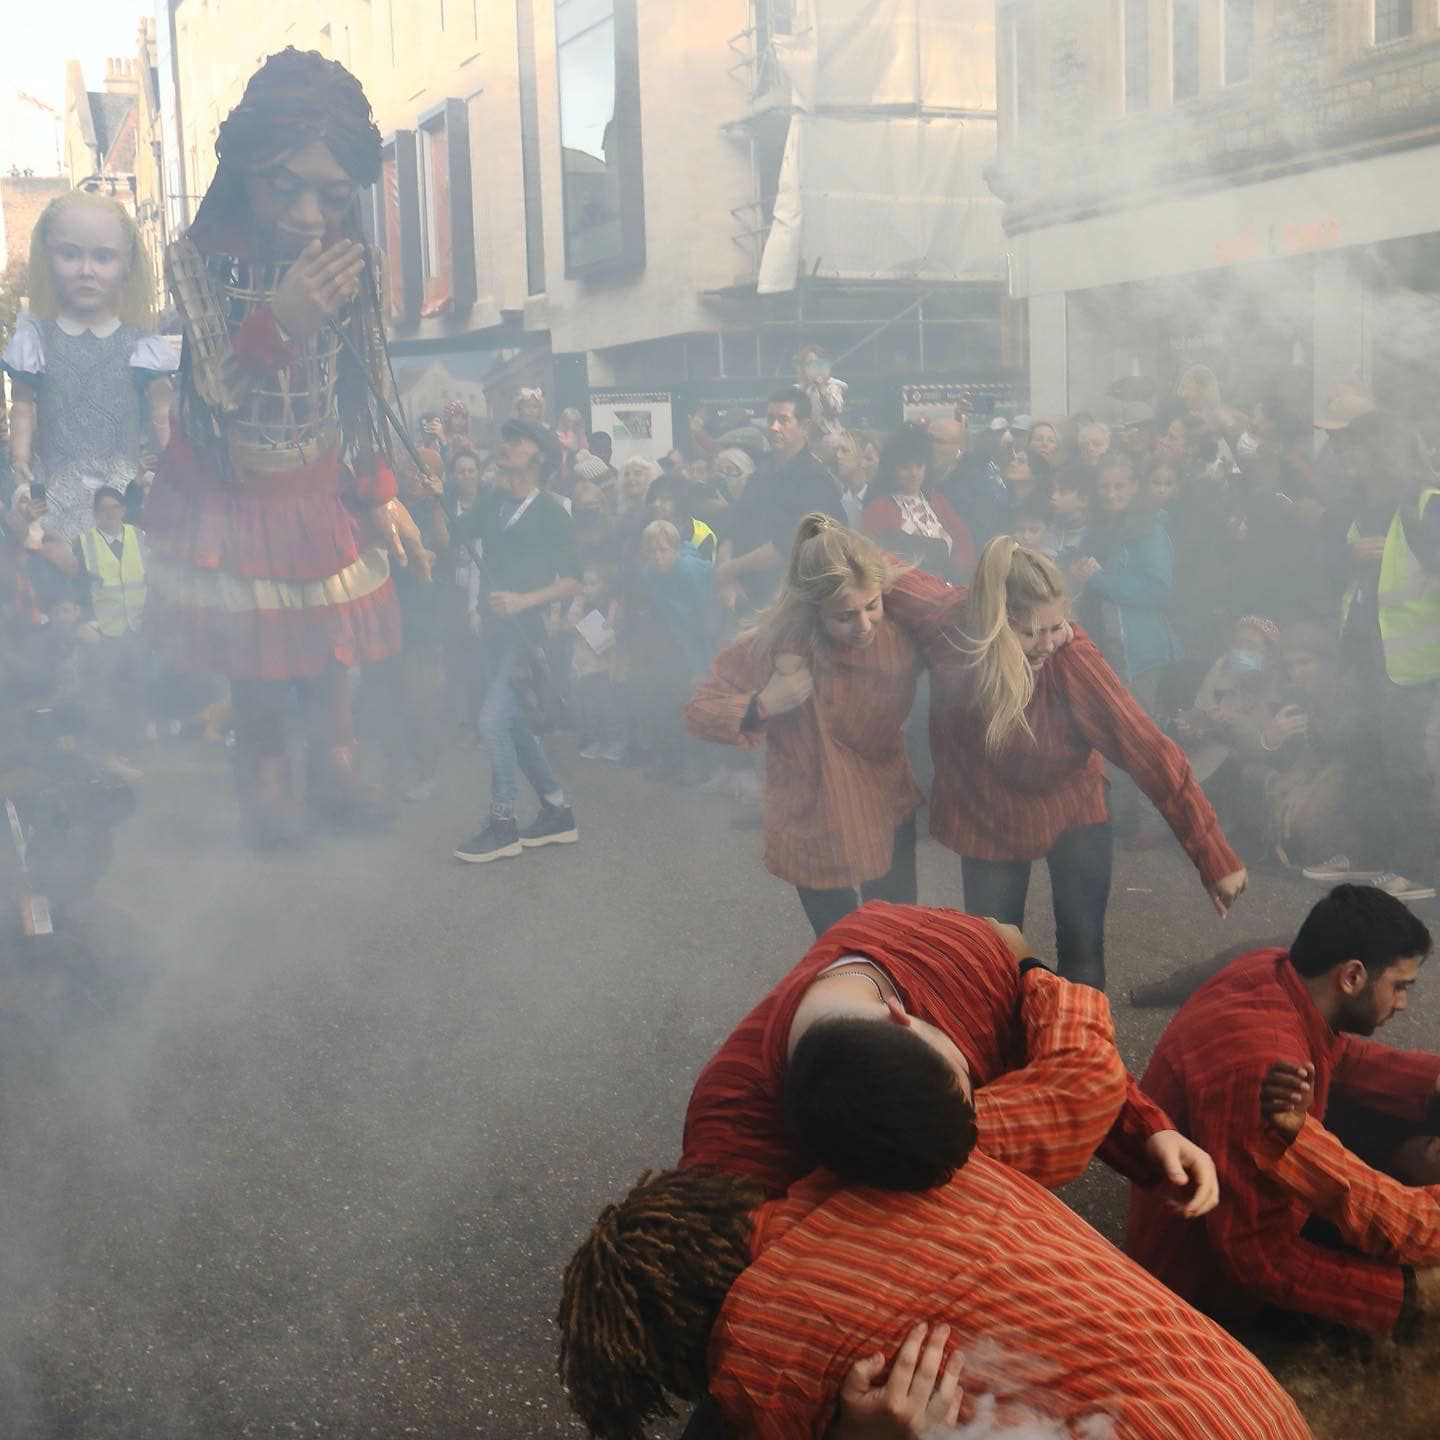 A large scale female puppet of a girl called Amal. She is from Syria. She is standing Next to another large scale Puppet of a girl with blonde hair called Alice.A group of people are  infant of them in couples they are holding each other.They recover from the ground. There is smoke. There are people standing around the action in  a crowd.